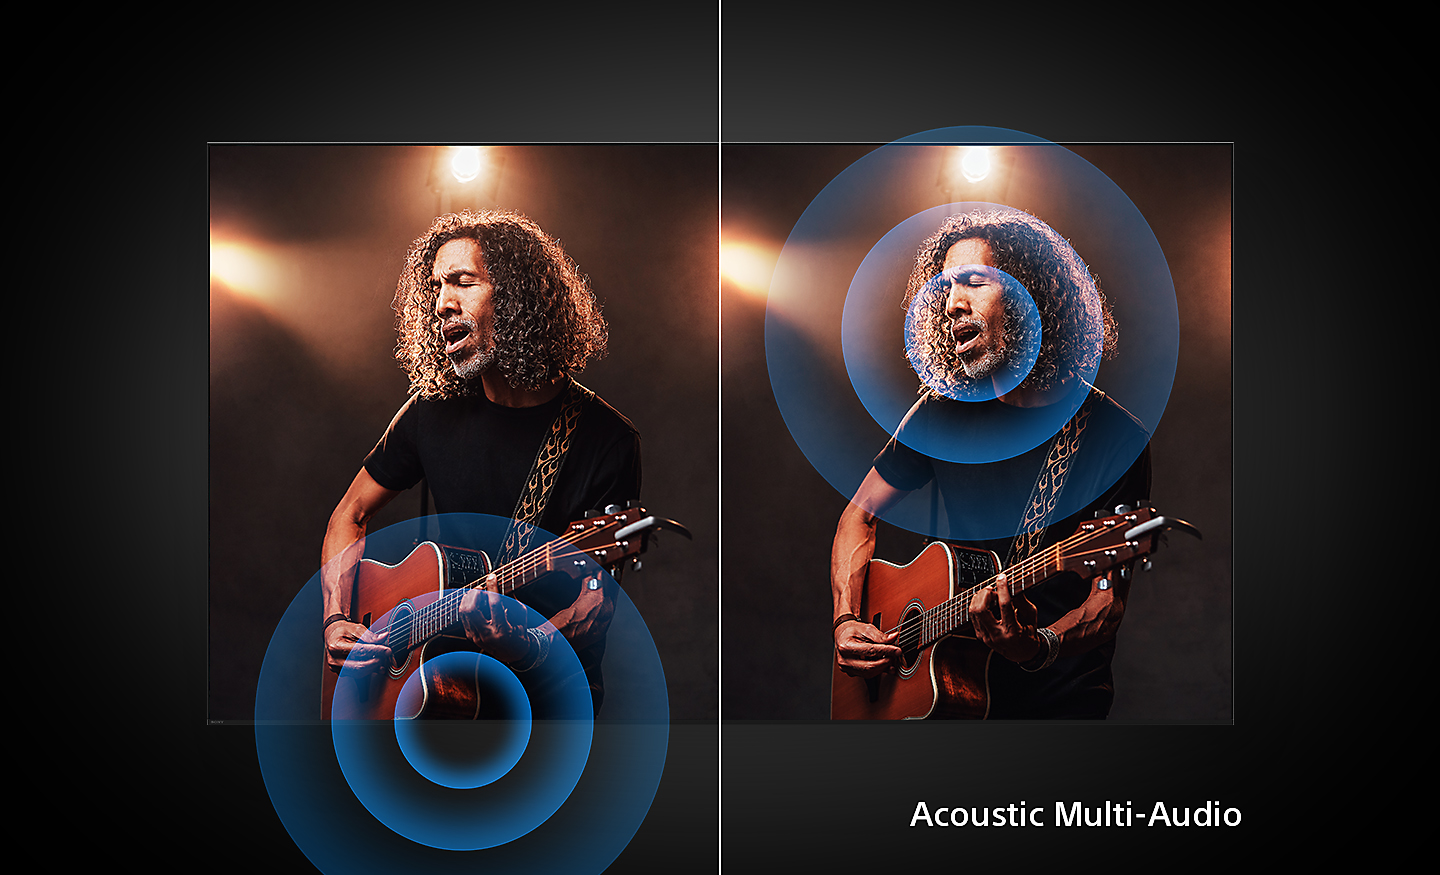 Split screen of a guitarist with left image showing how a conventional TV emits sound from beneath the screen and right image showing how a BRAVIA with Acoustic Multi-Audio+ emits sound from the guitarist for more realism